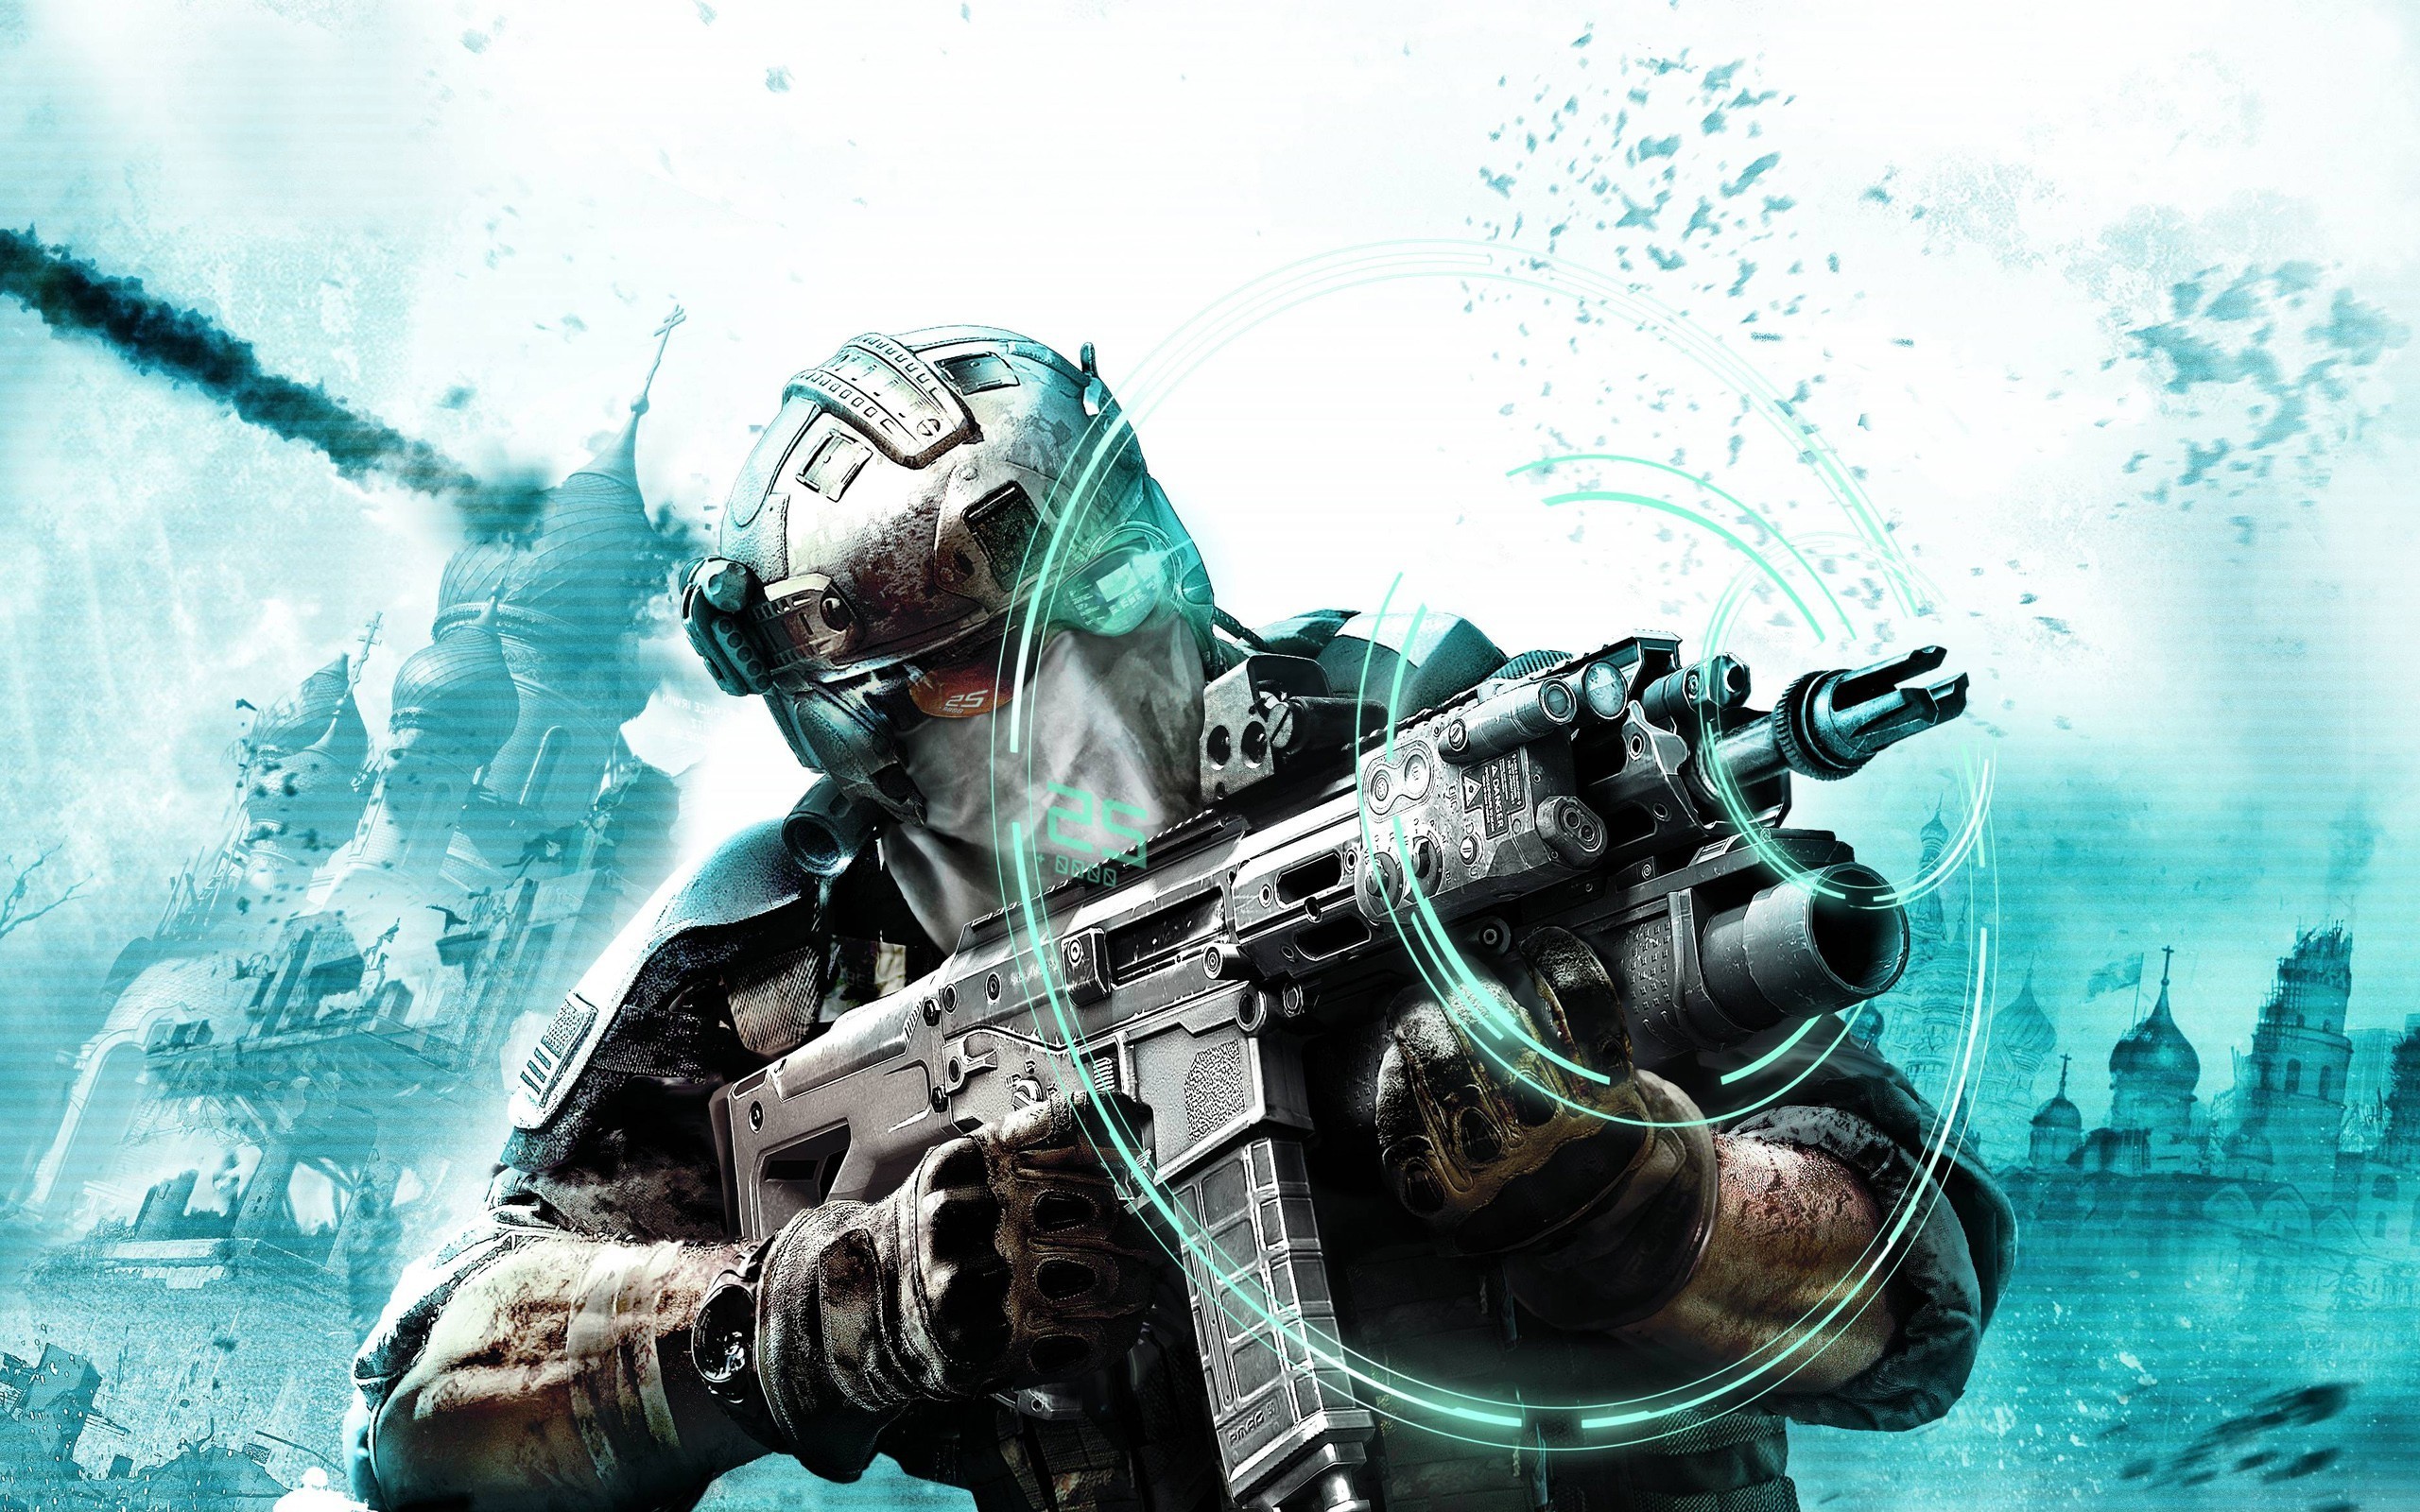 2560x1600 Futuristic weapons technology ghost recon future soldier wallpaper